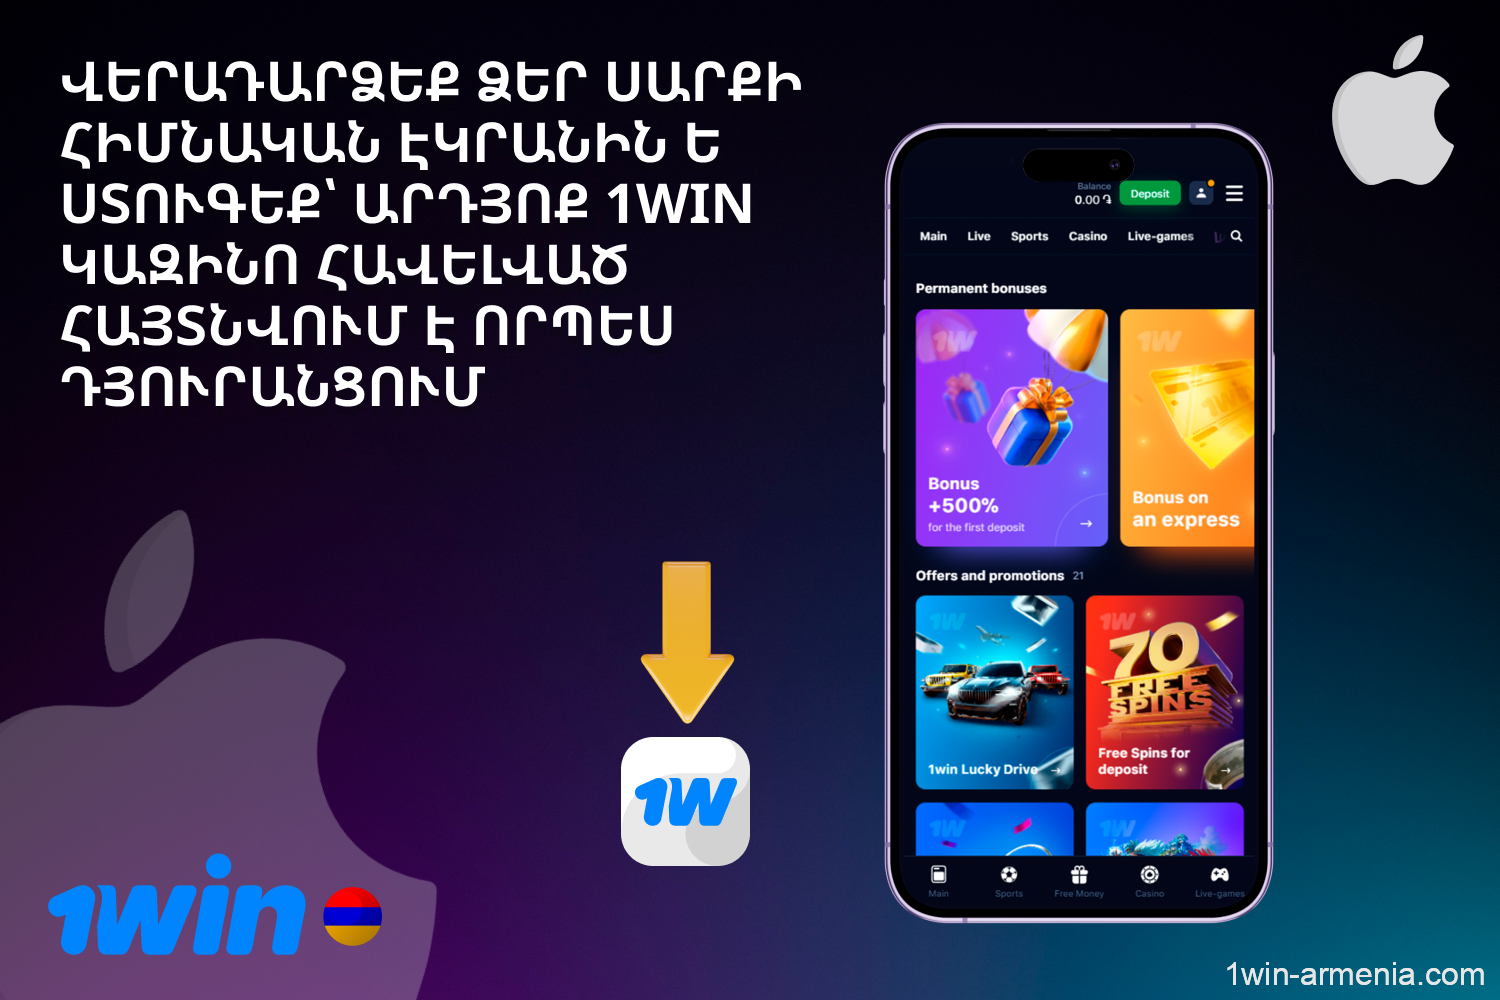 The 1win casino app is launched on an iOS device via a shortcut on the home screen